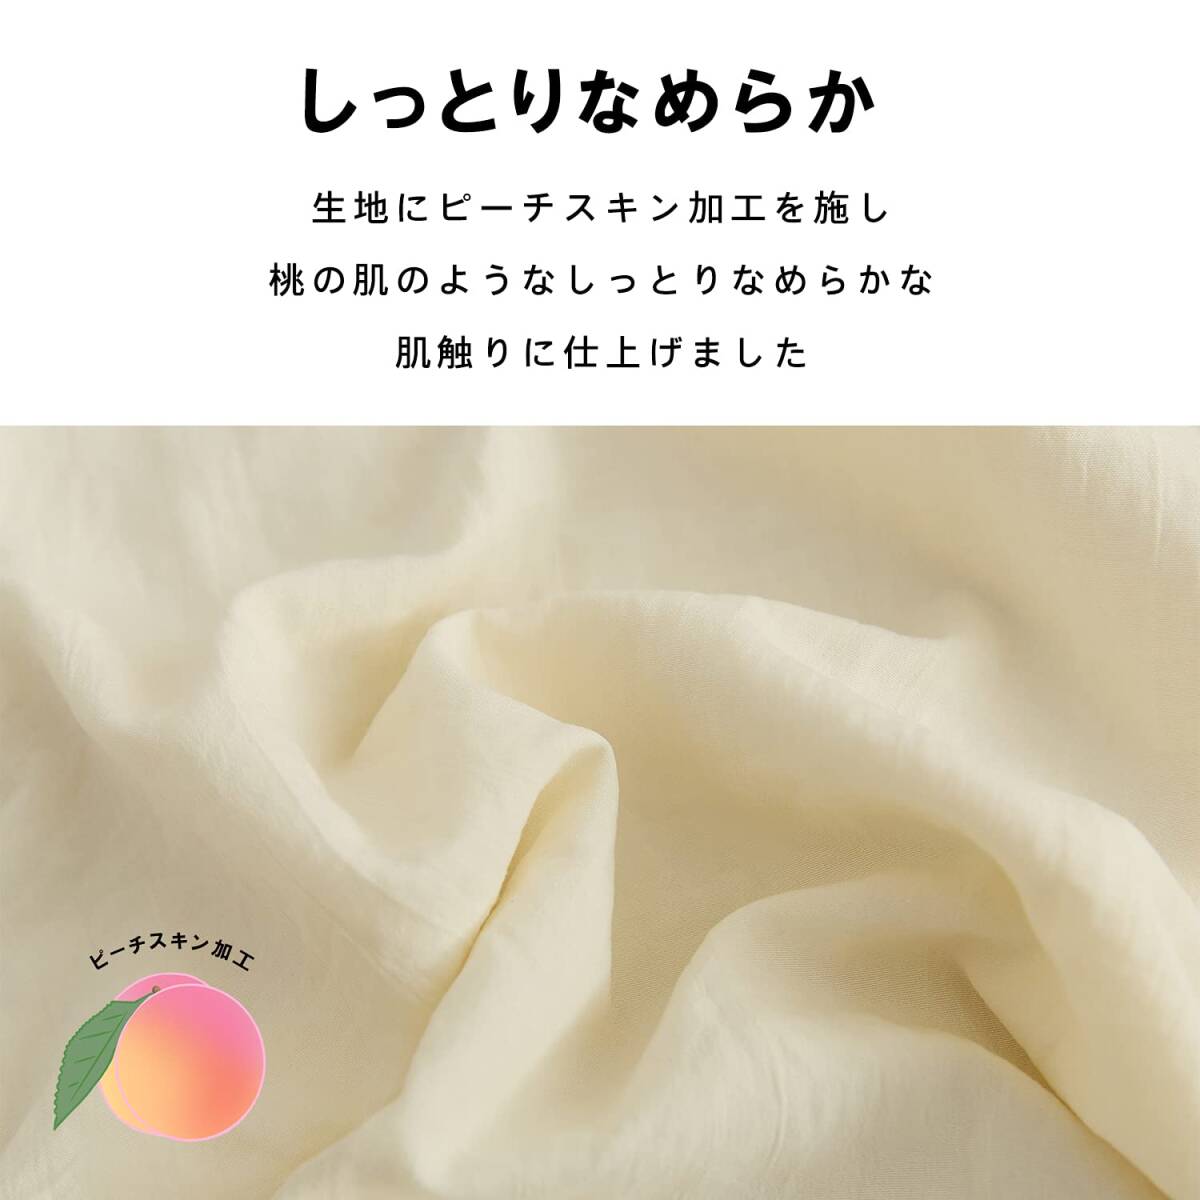  three ... futon cover washing with water processing single long pink pastel color ... wrinkle becoming difficult 429631-0012